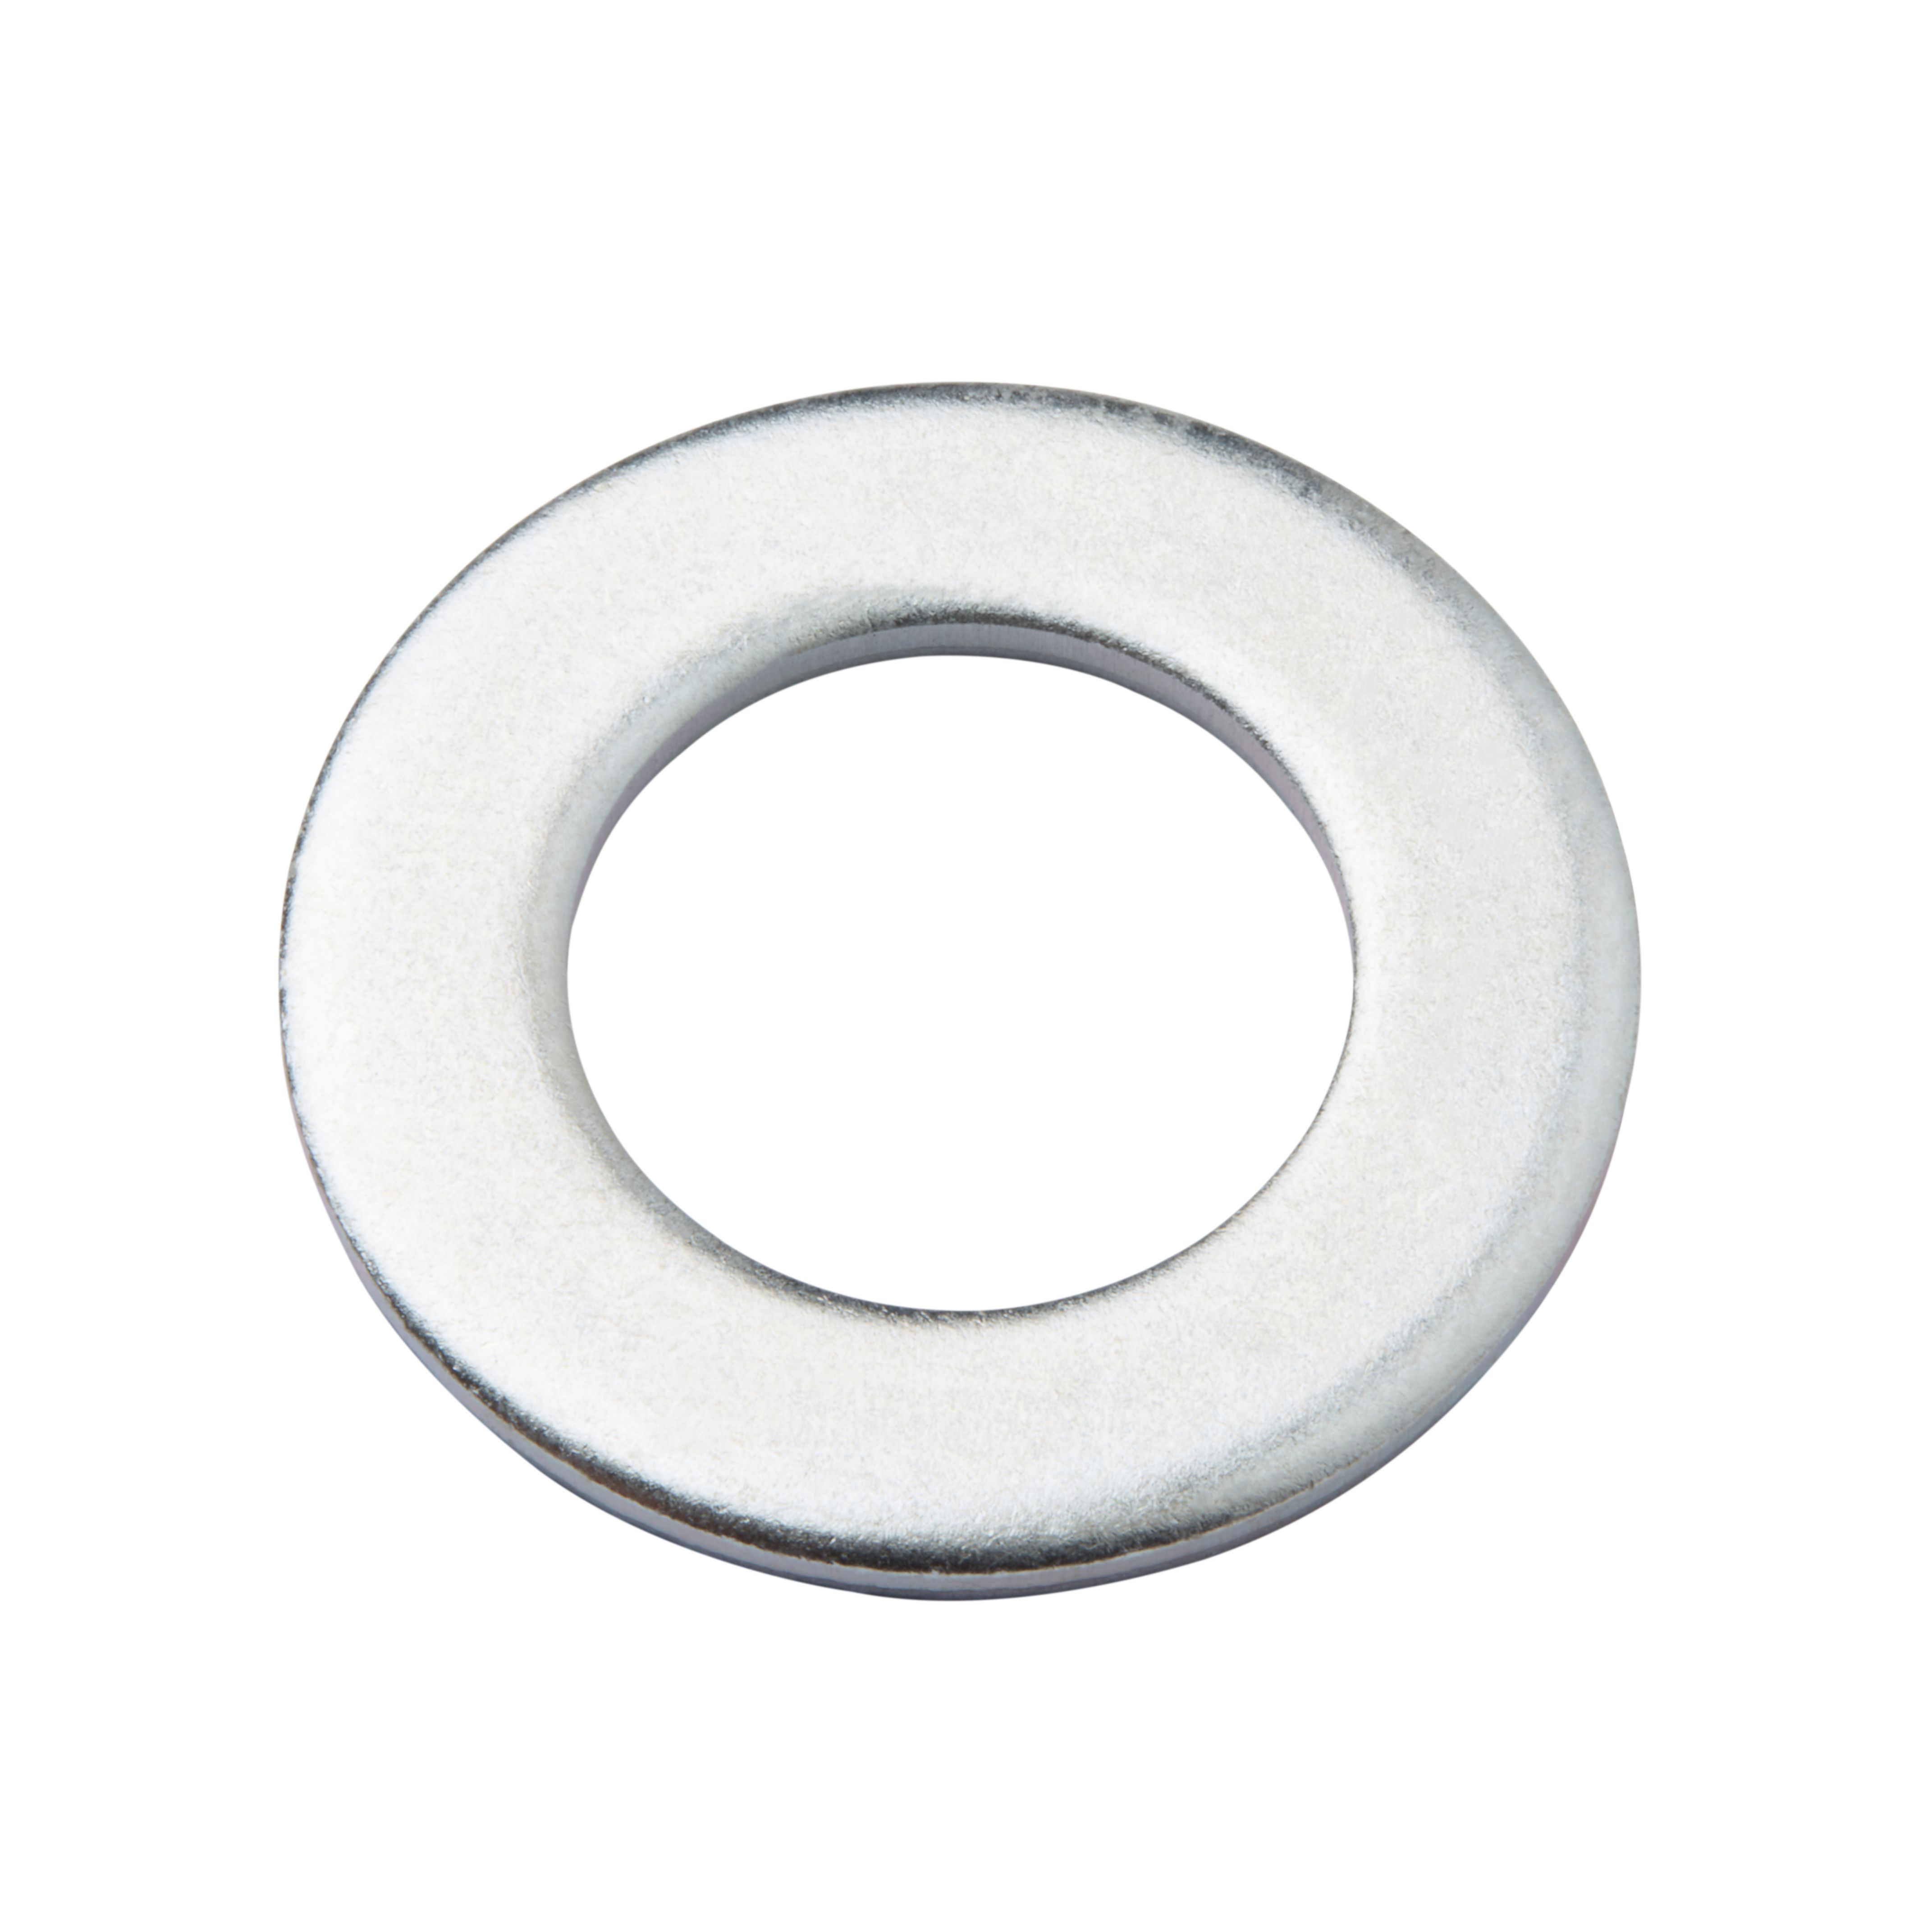 Diall M12 Carbon steel Flat Washer, Pack of 5